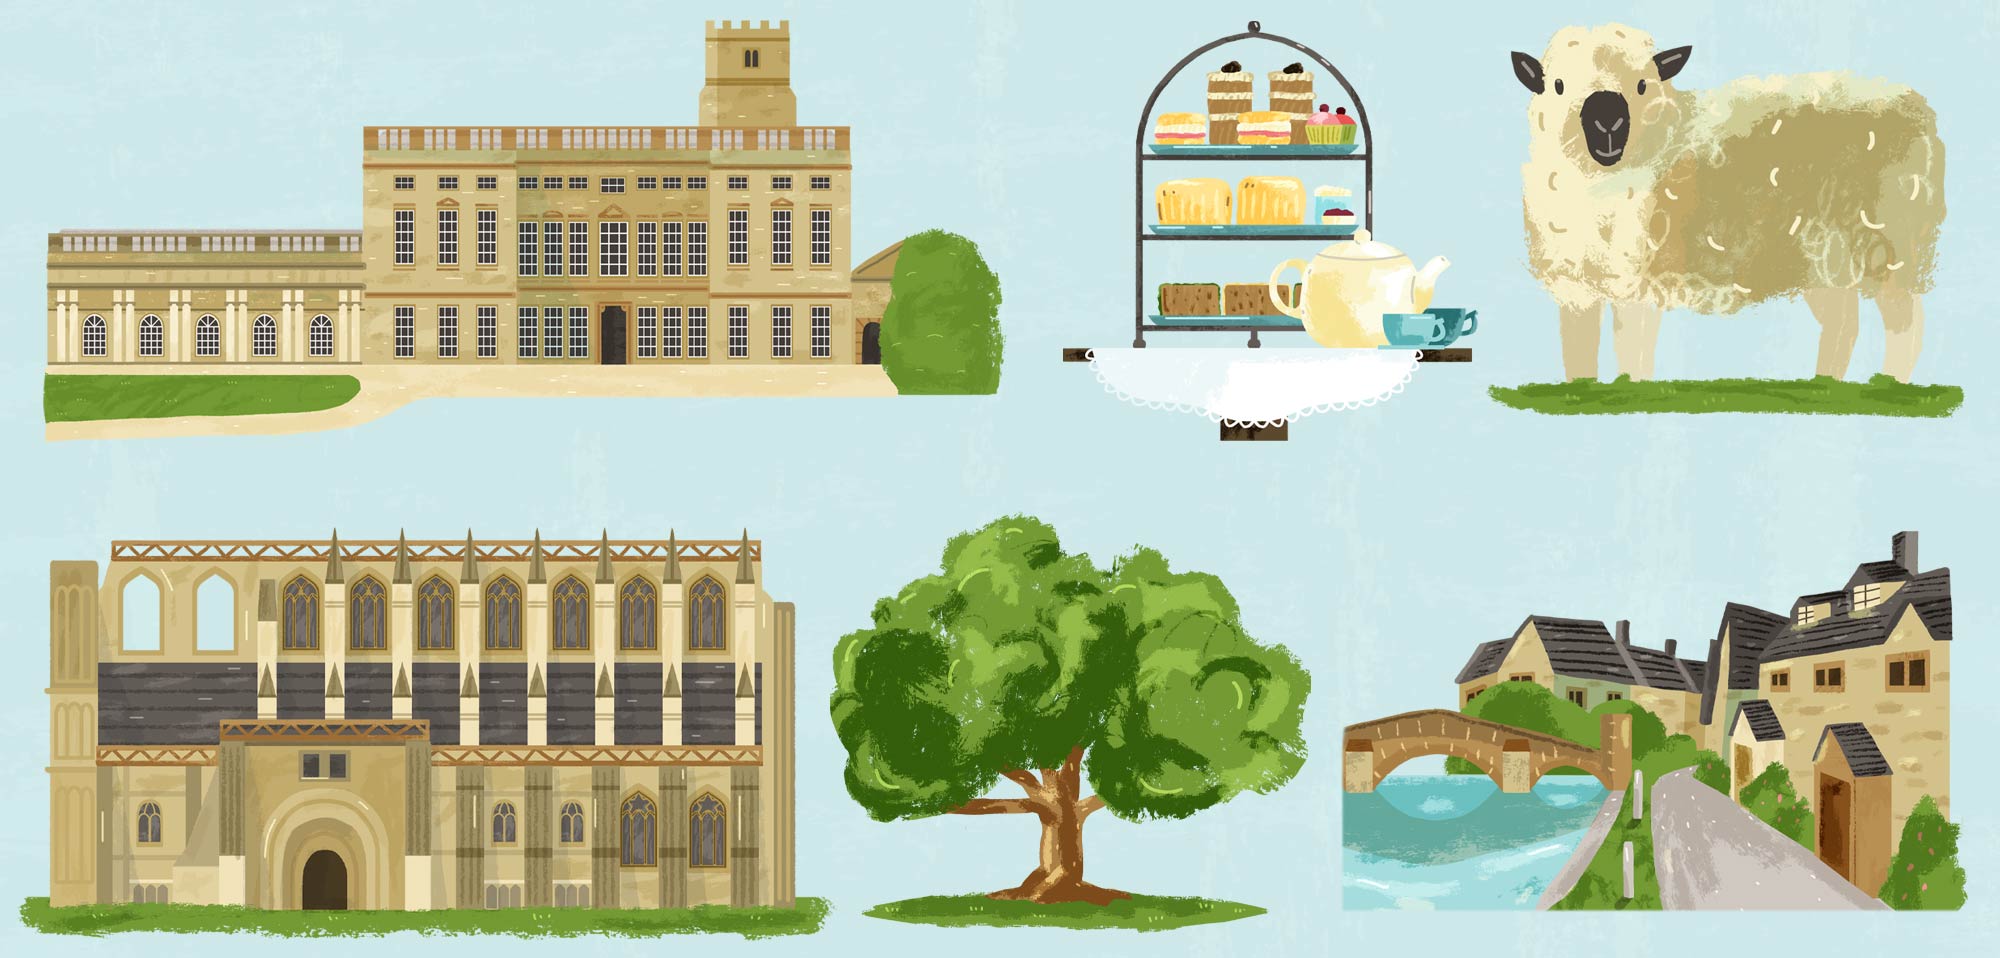 Spot illustrations of a map of the Cotswolds by Elly Jahnz